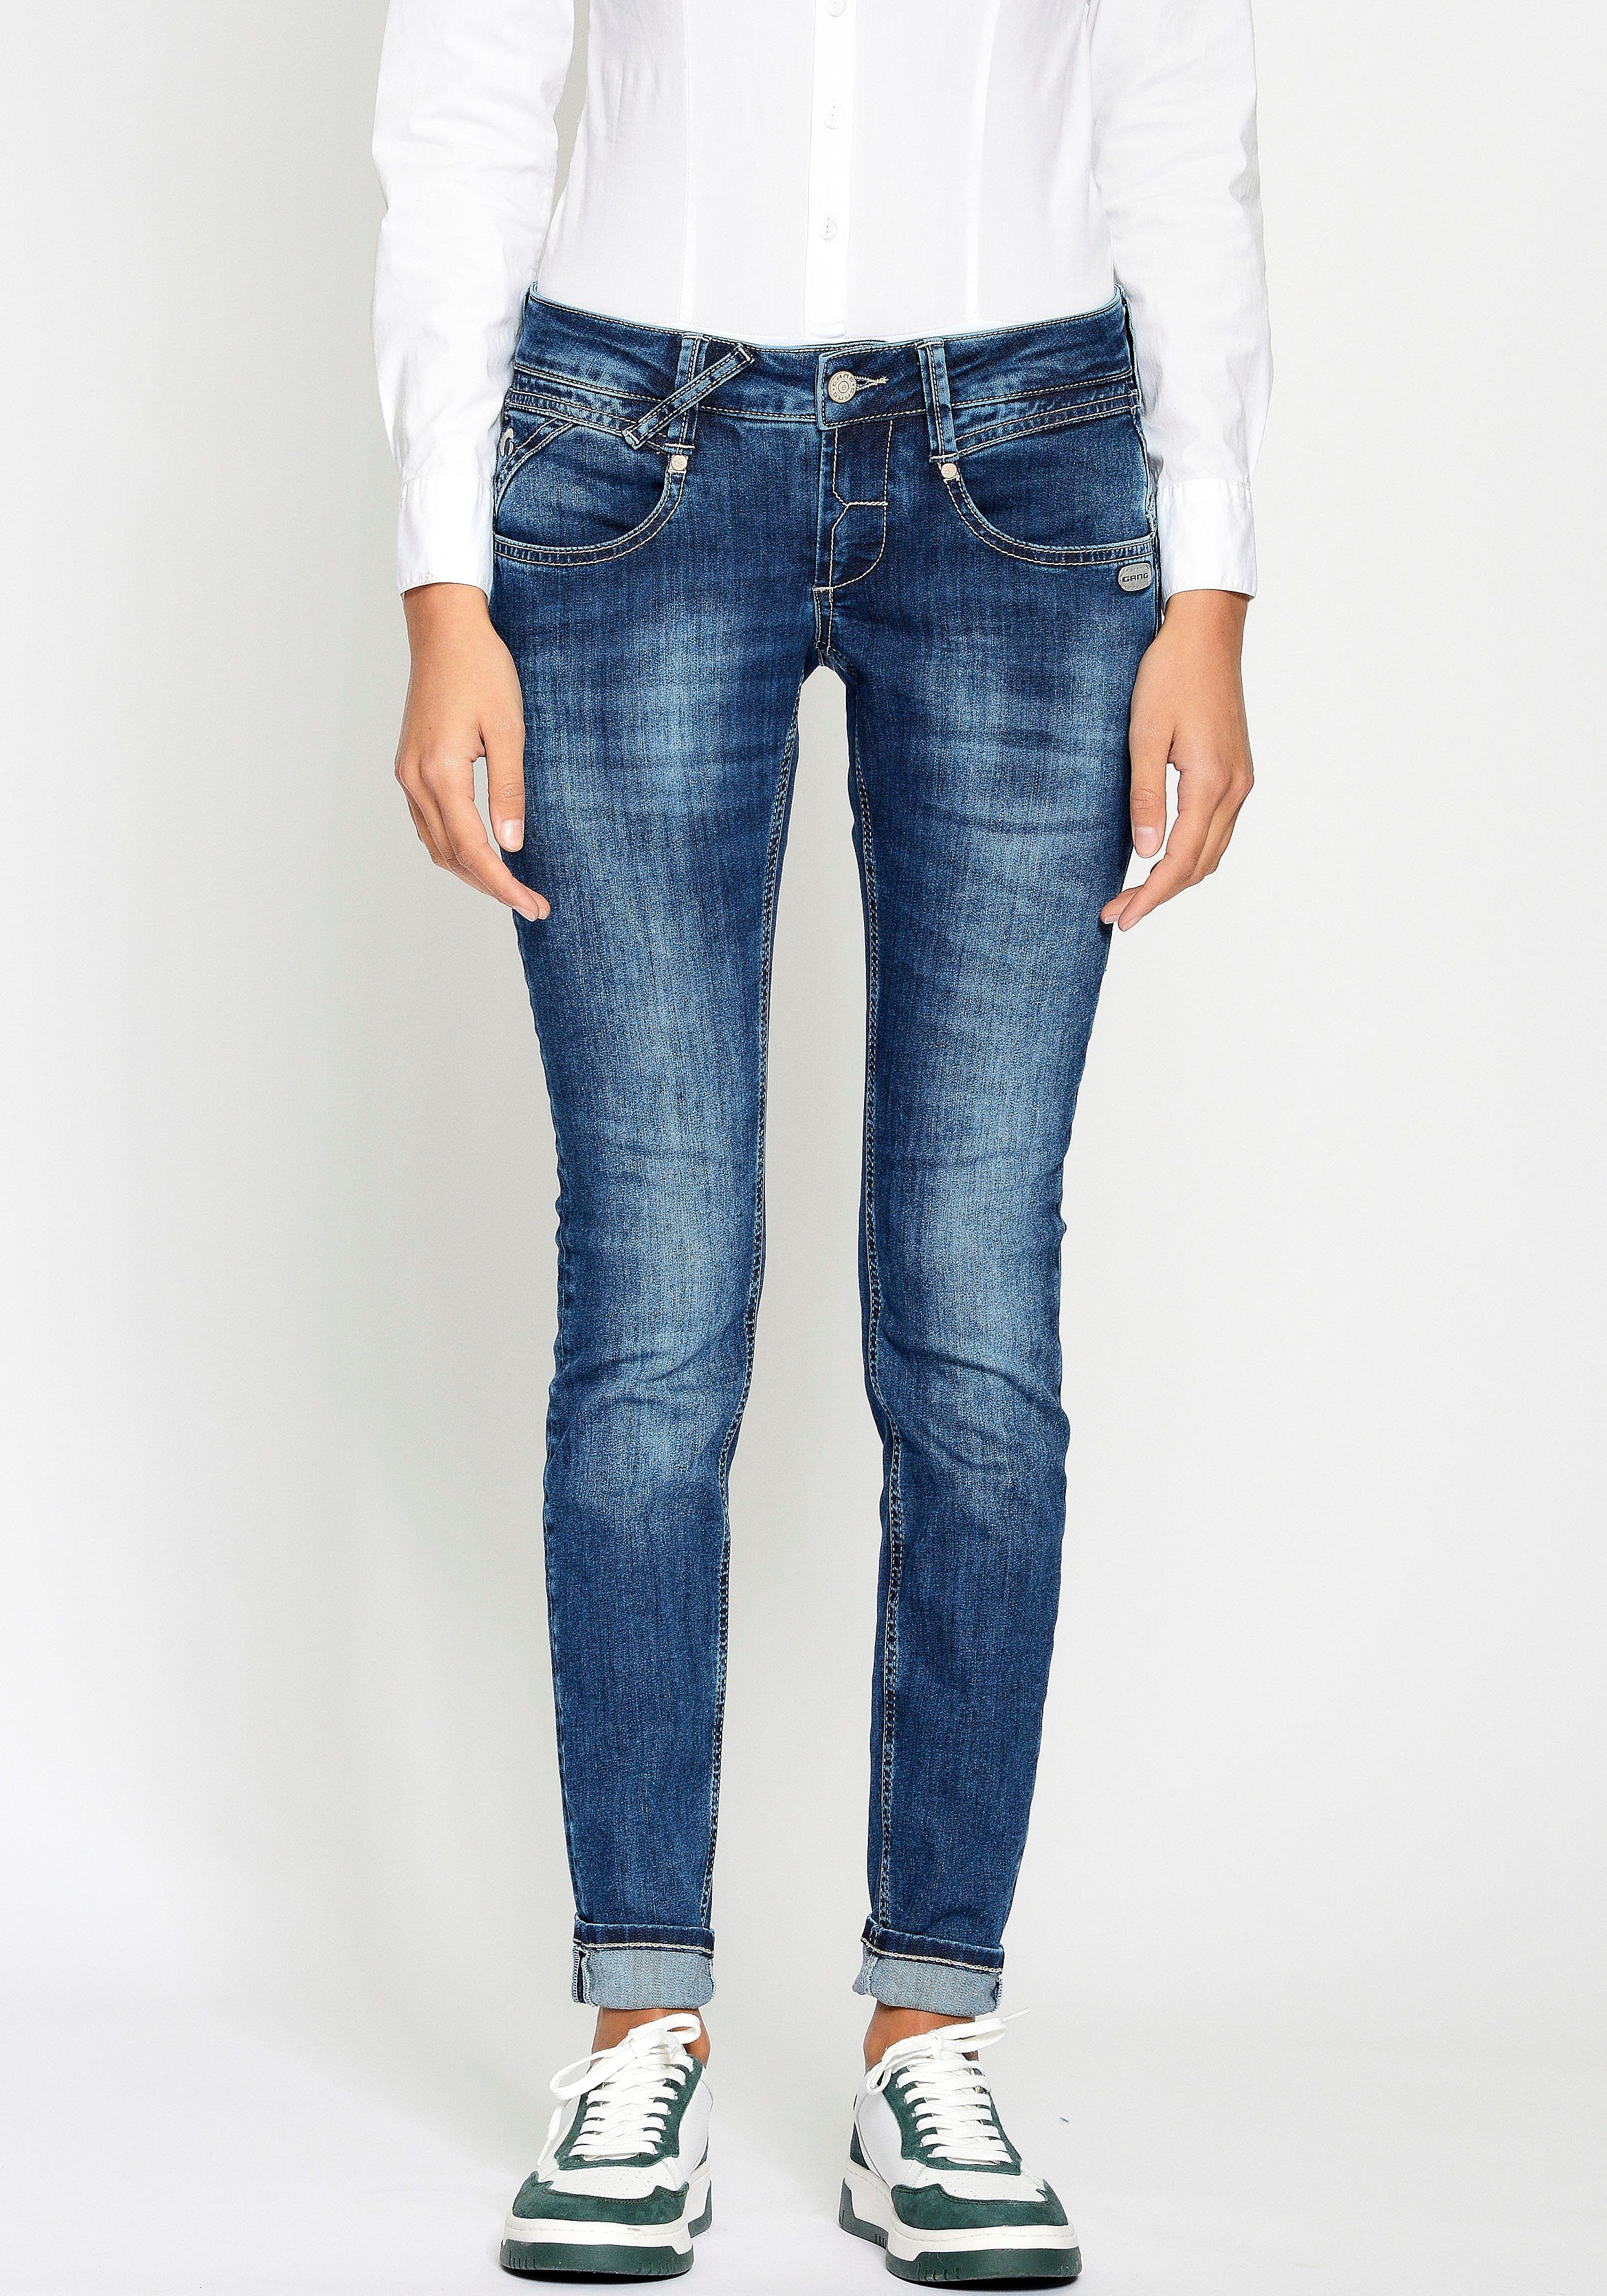 GANG Skinny-fit-Jeans 94Nena in authenischer Used-Waschung mid blue